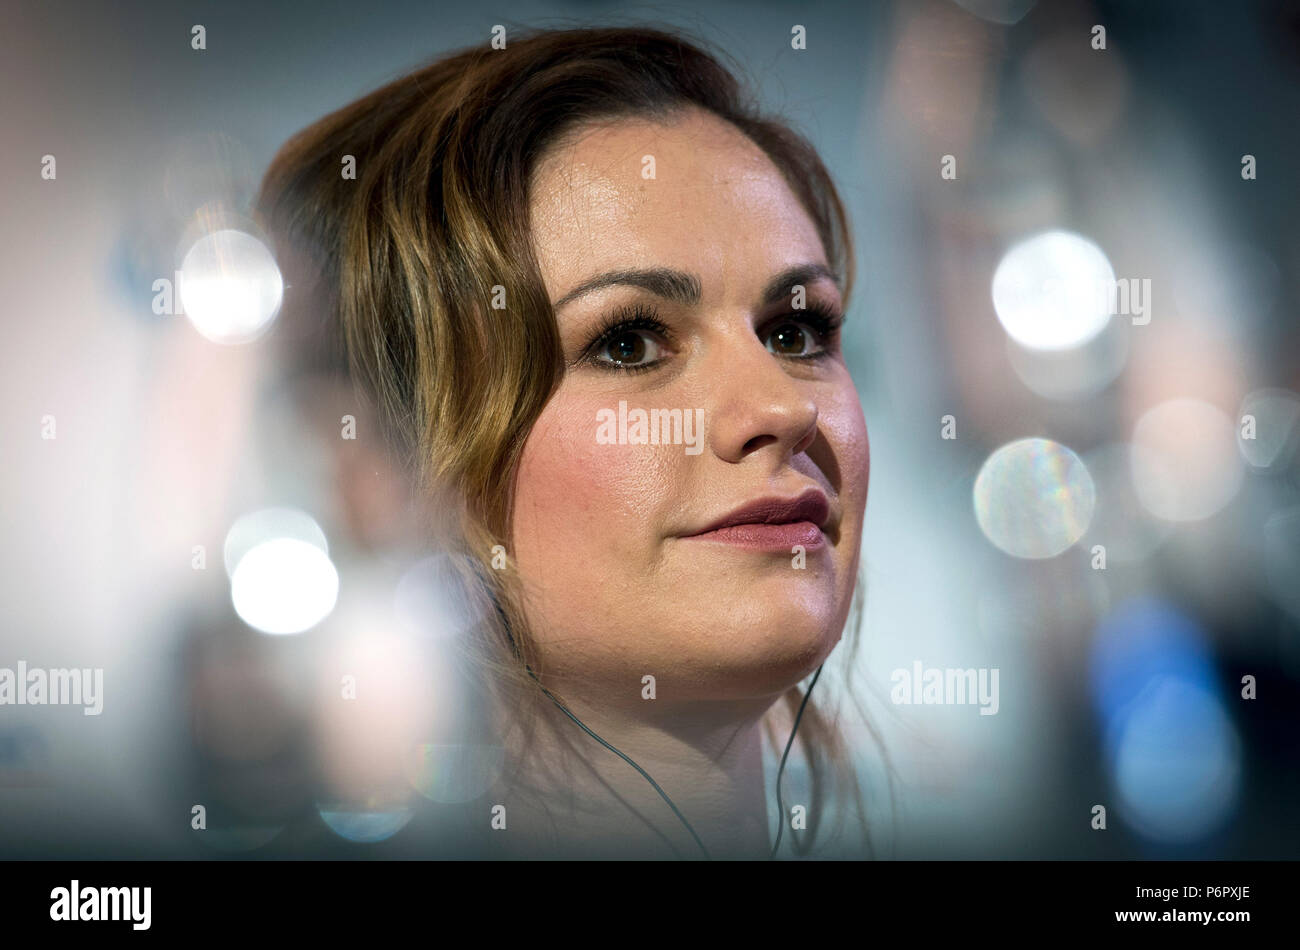 Karlovy Vary, Czech Republic. 01st July, 2018. Actress Anna Paquin attends a news conference to Moyer's film The Parting Glass at the screening in Thermal Hotel during the International Film Festival in Karlovy Vary, Czech Republic, on July 1, 2018. (CTK Photo/Katerina Sulova Stock Photo